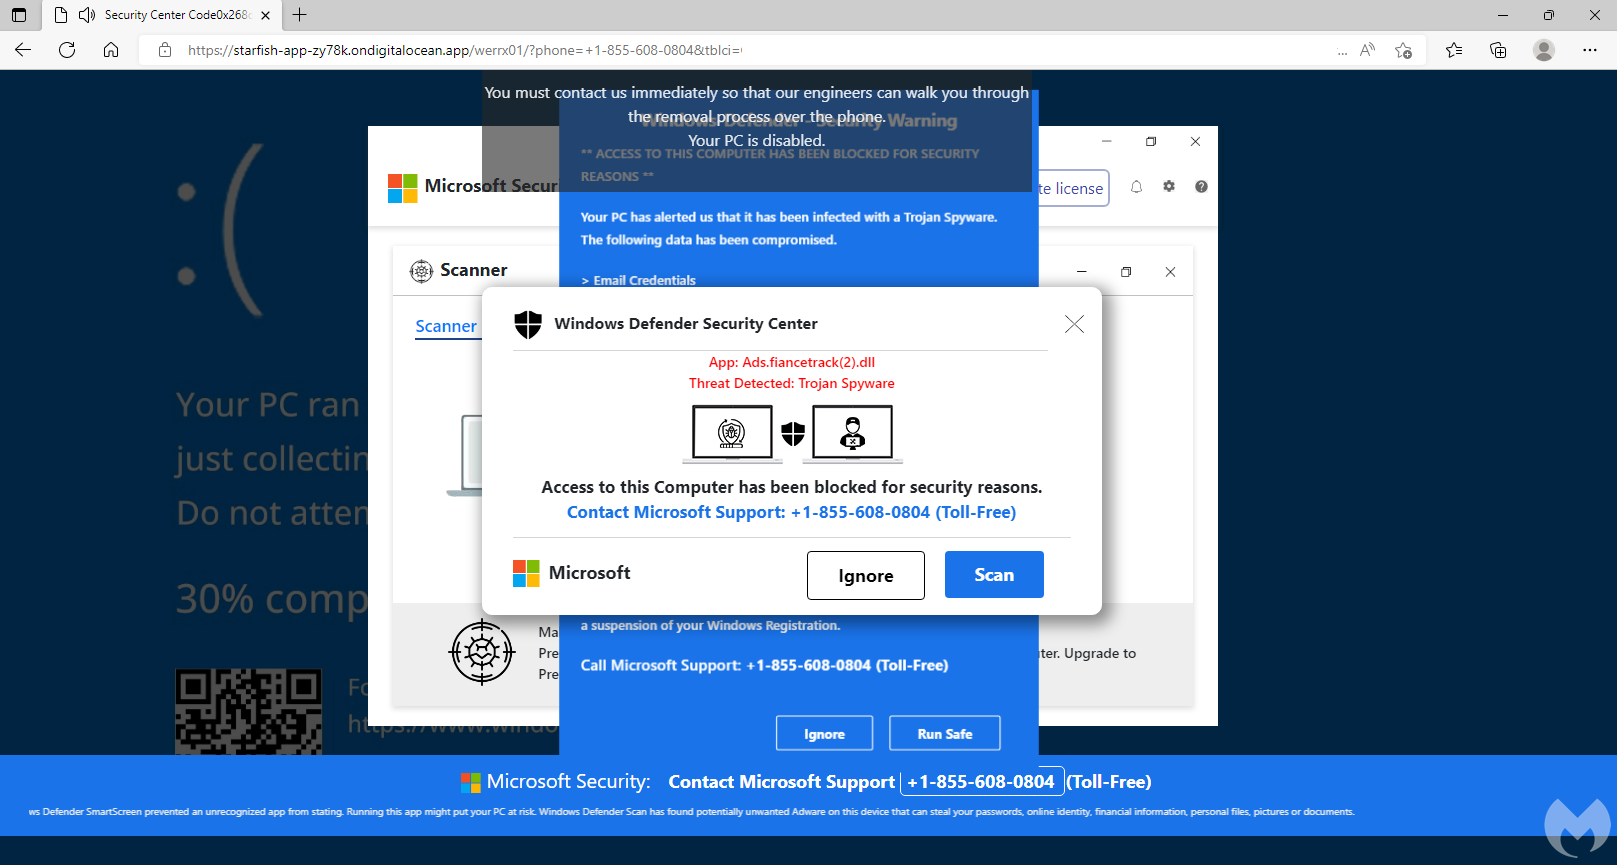 Screenshot of a web page showing a fake Windows Defender message